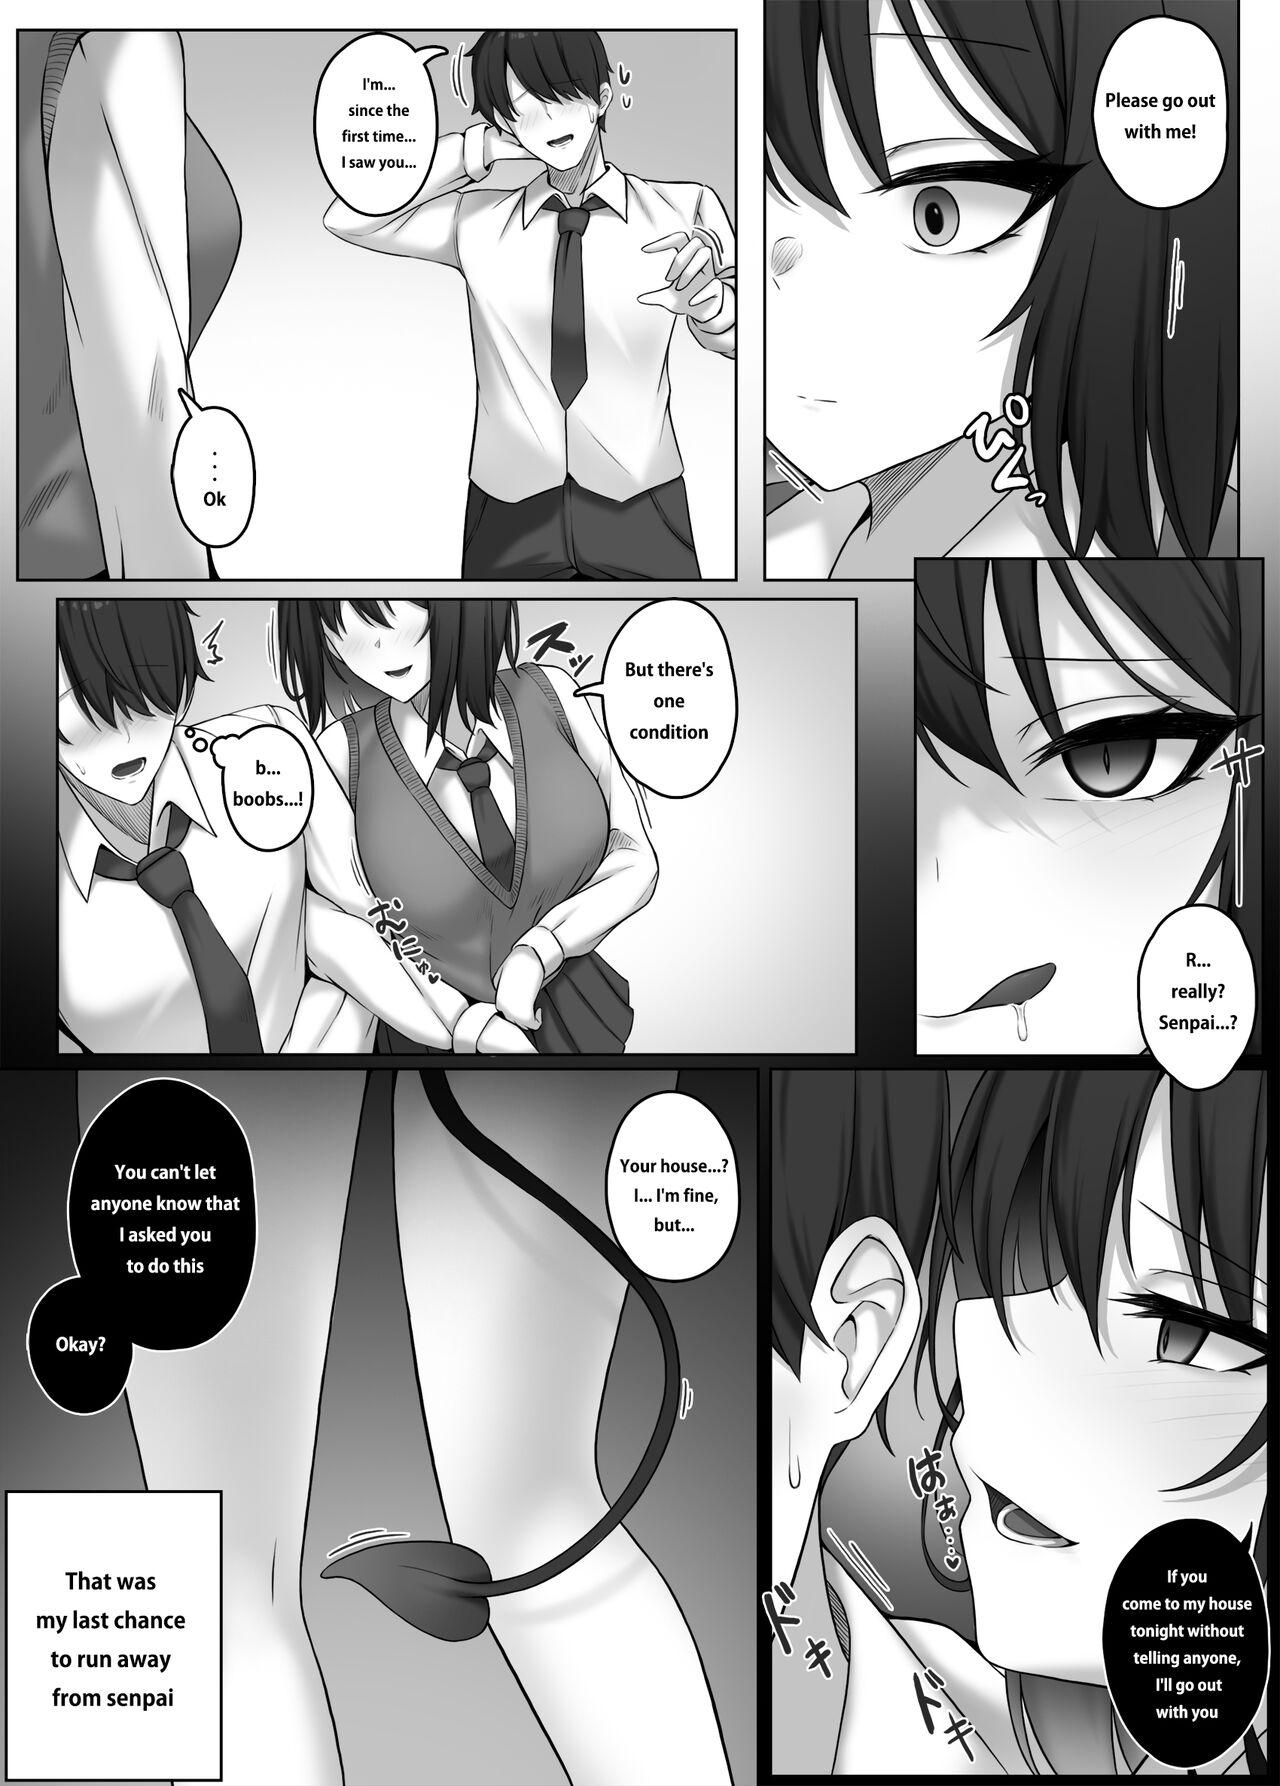 Toy Succubus House Gaydudes - Page 2